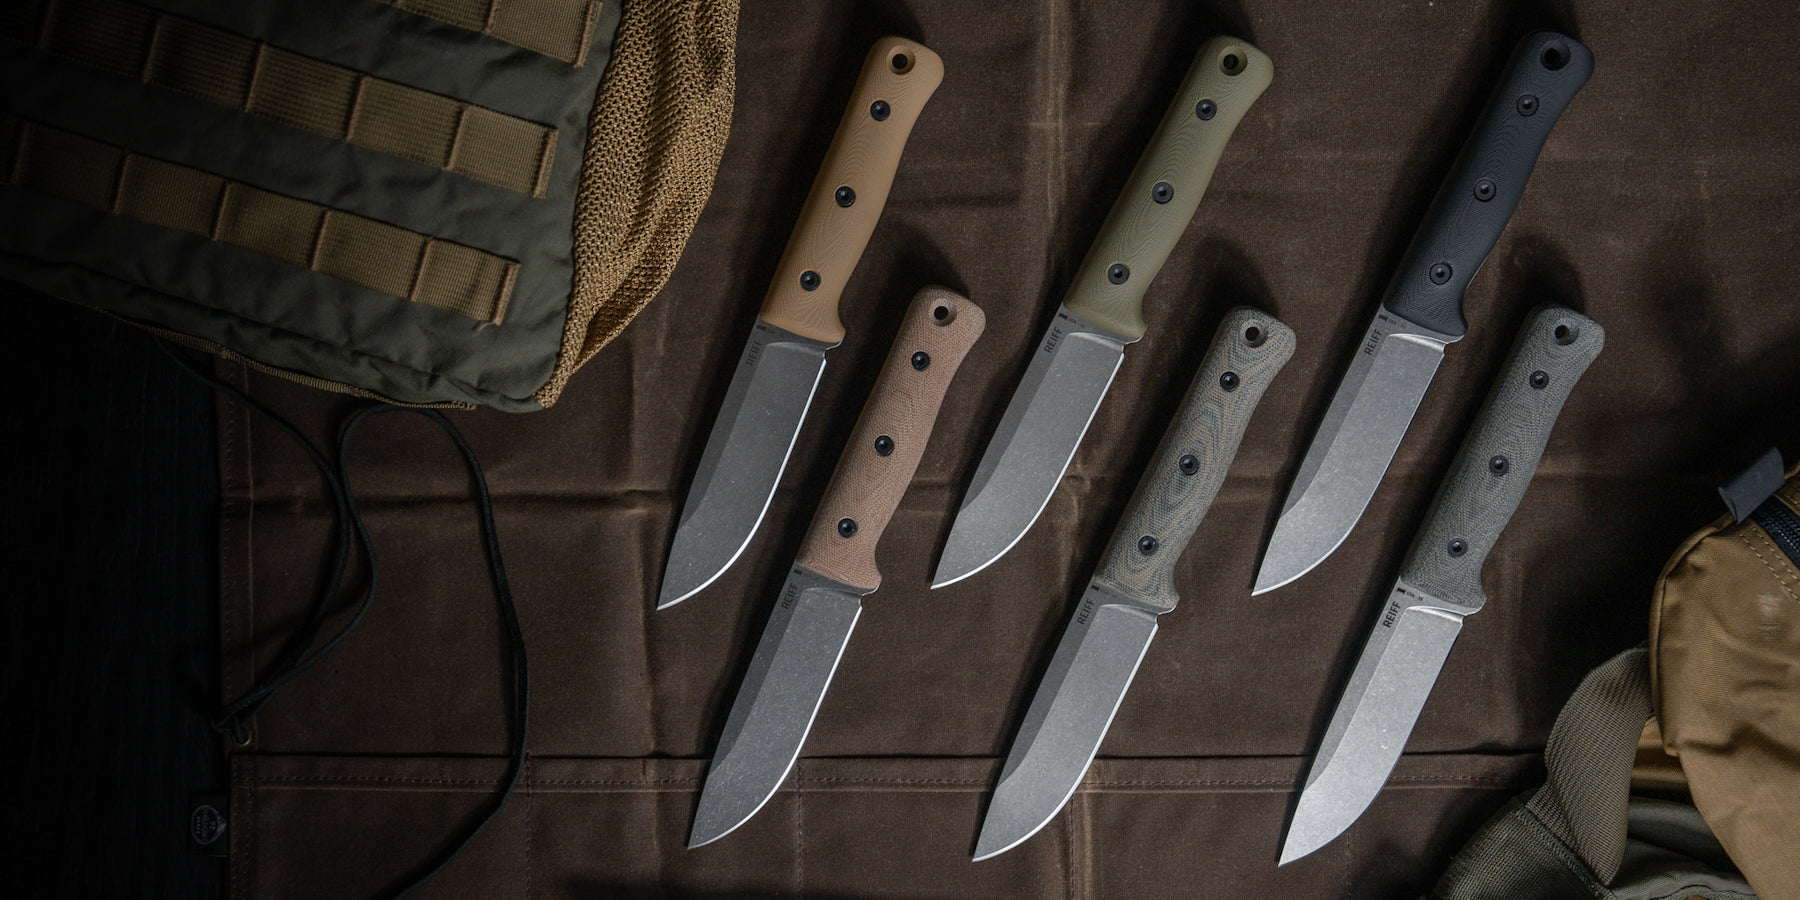 The new Reiff Knives F4 Scandi Bushcraft Knife Coming Sept. 26th